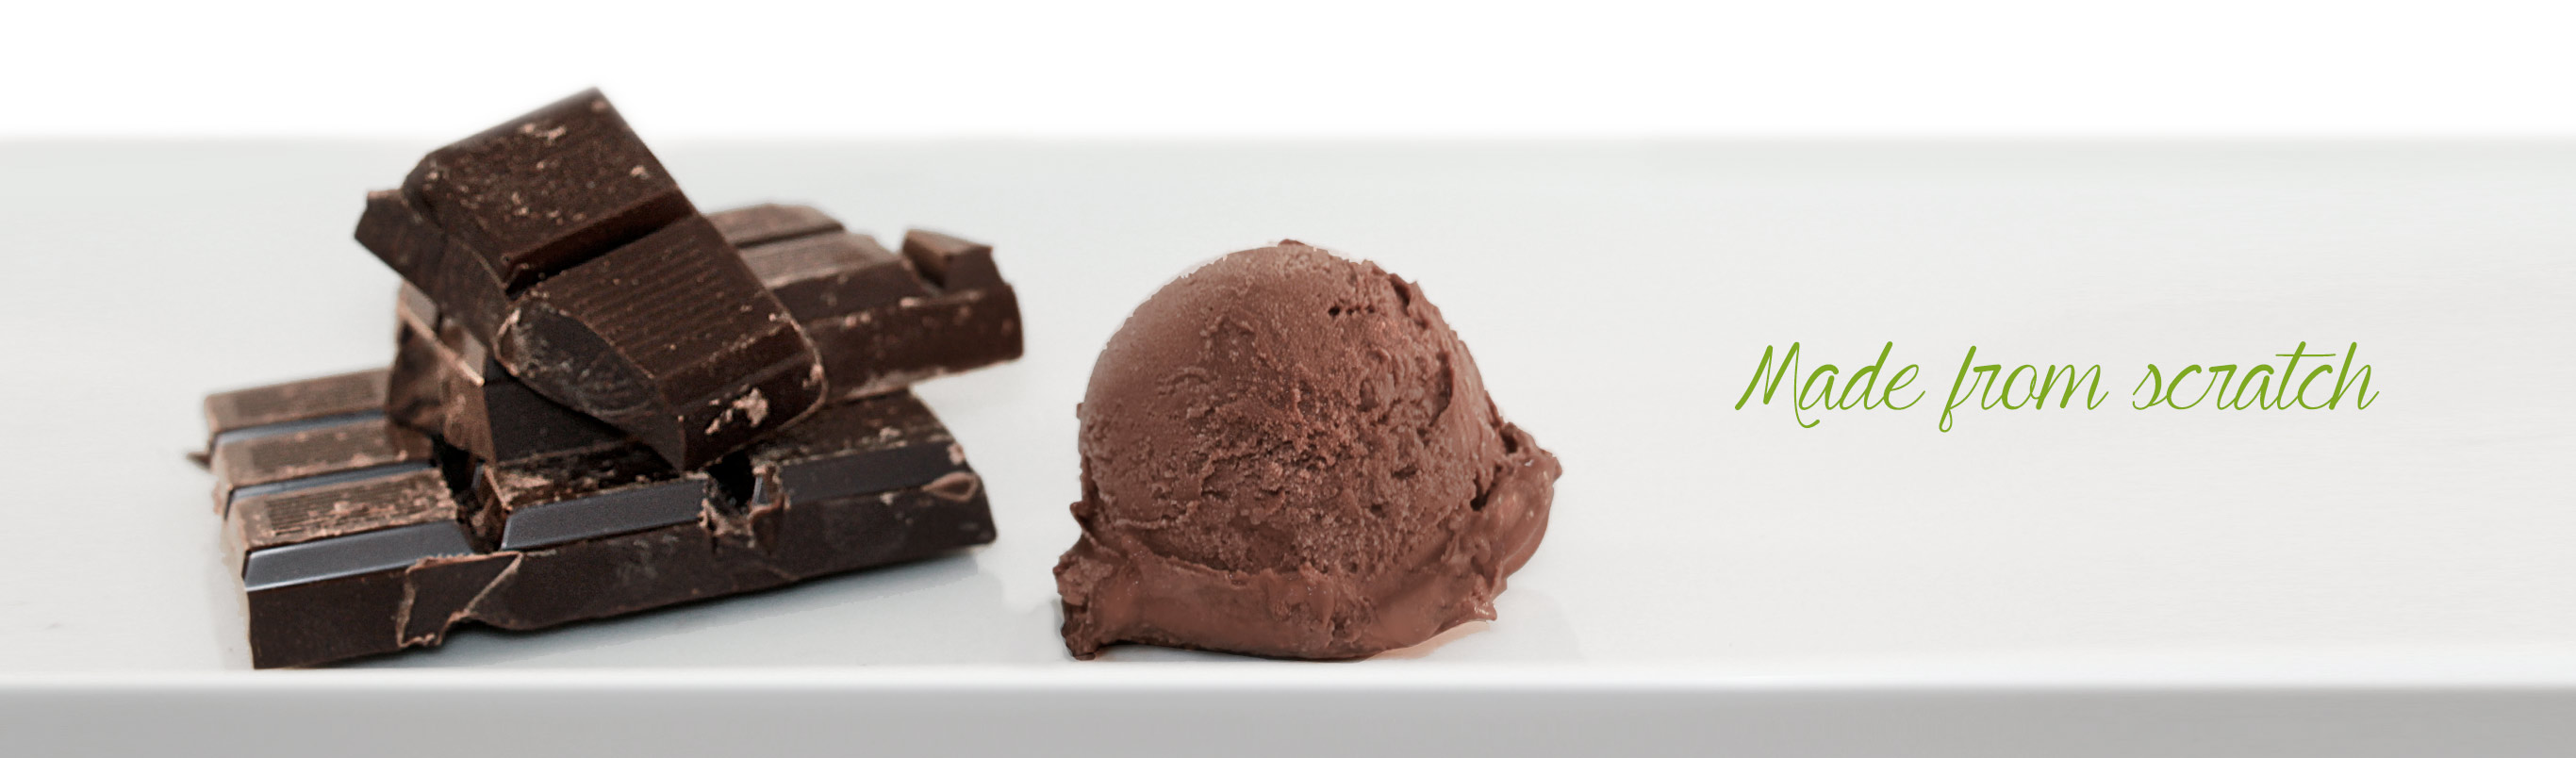 dark chocolate bar and chocolate gelato with text:Made from scratch